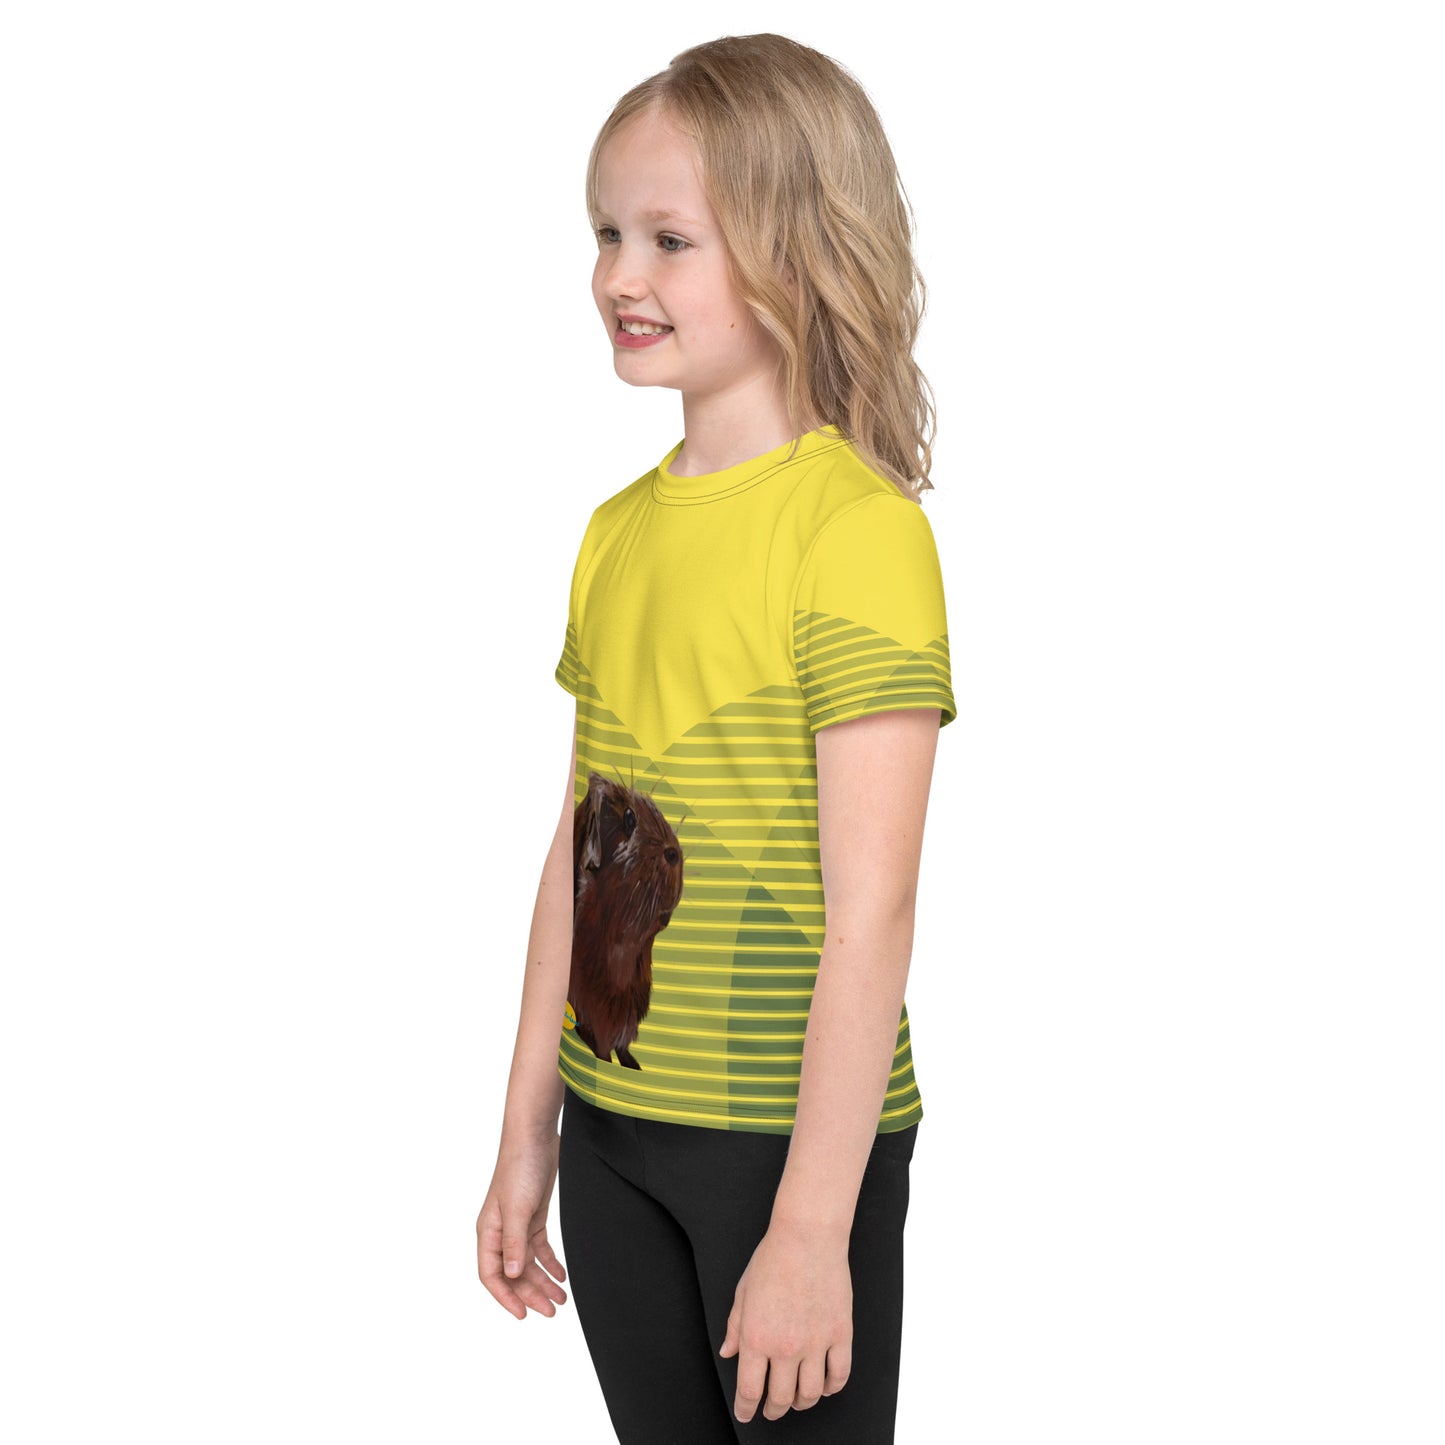 Gunther the Guinea Pig (Yellow and Green) Kids crew neck t-shirt